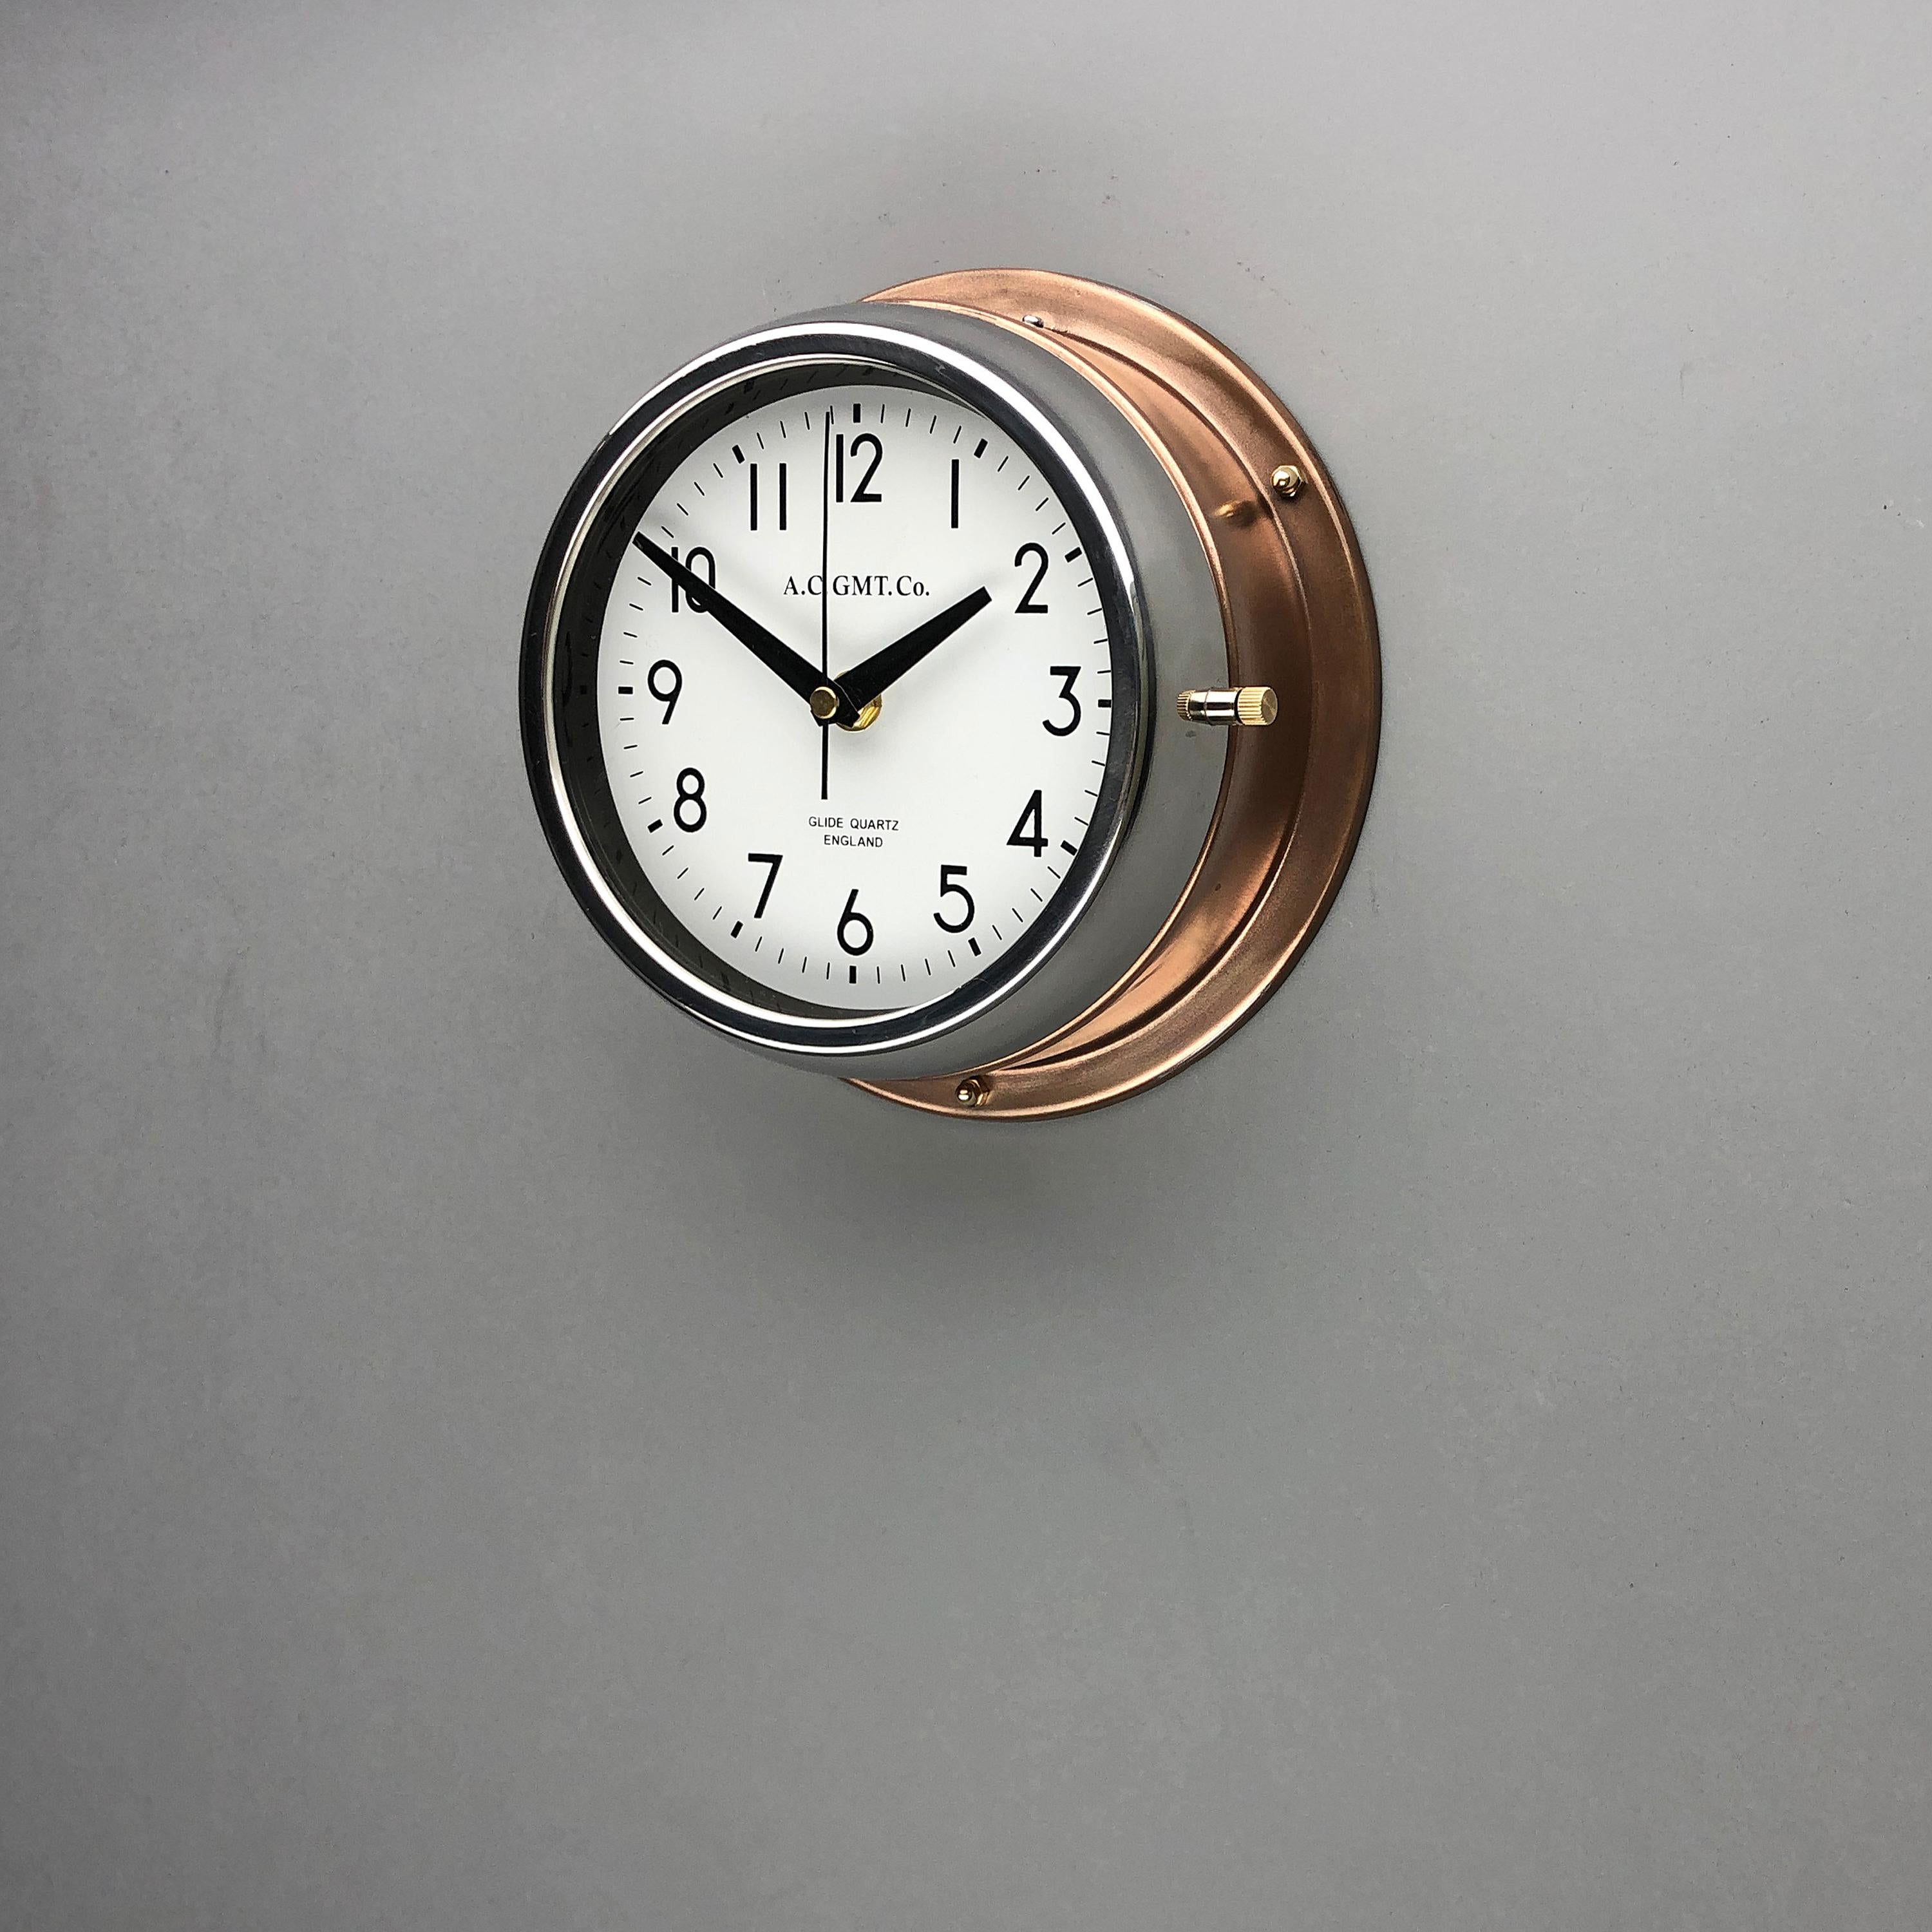 1970s British Bronze and Chrome AC GMT Co. Industrial Wall Clock White Dial 5